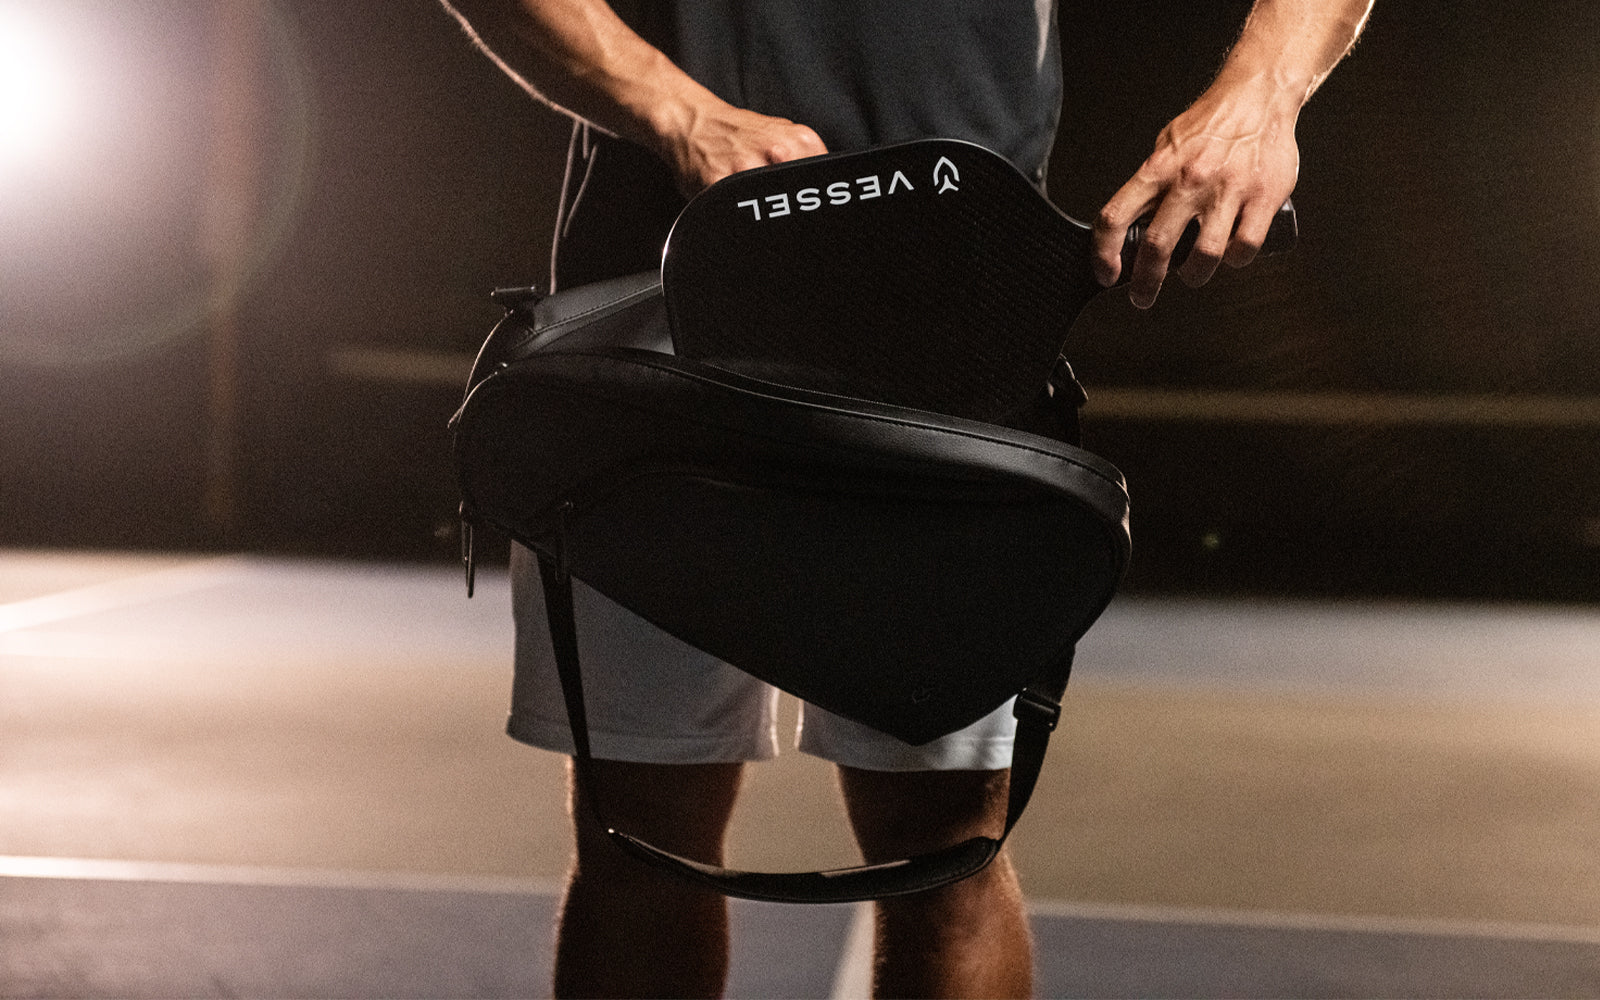 Black carbon pickleball paddle being put into black leather pickleball bag on pickleball court